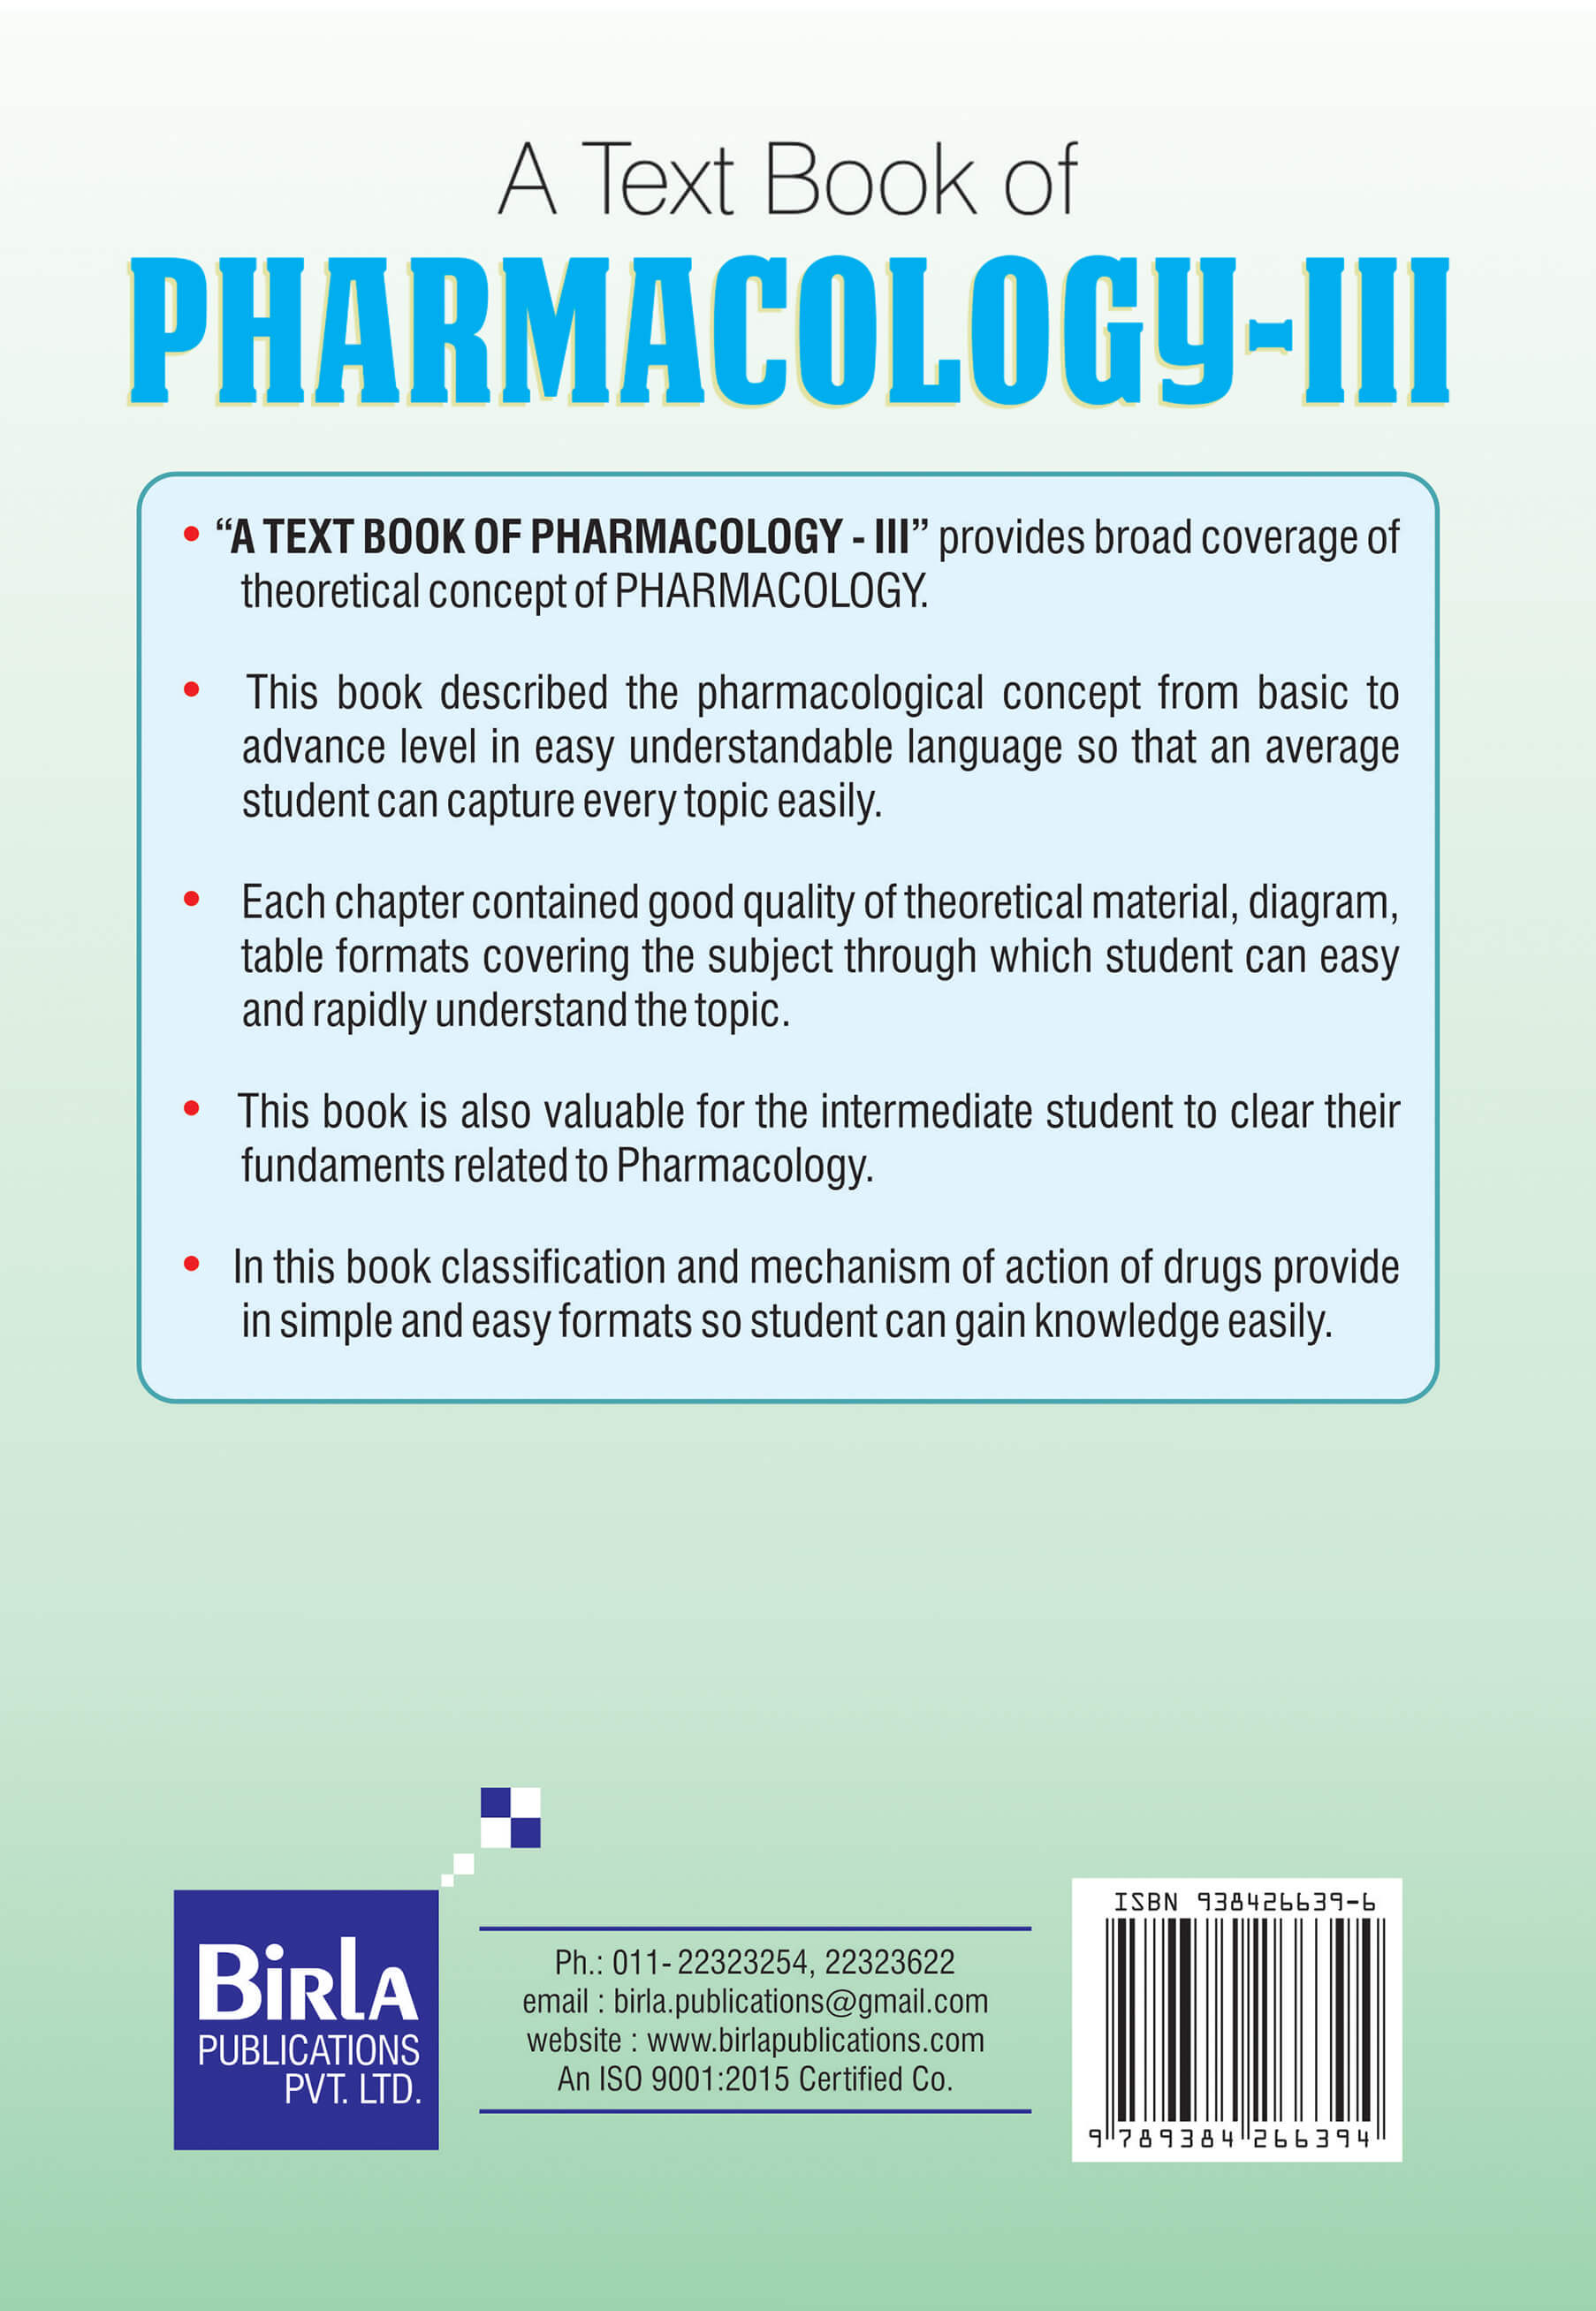 A TEXT BOOK OF PHARMACOLOGY-III